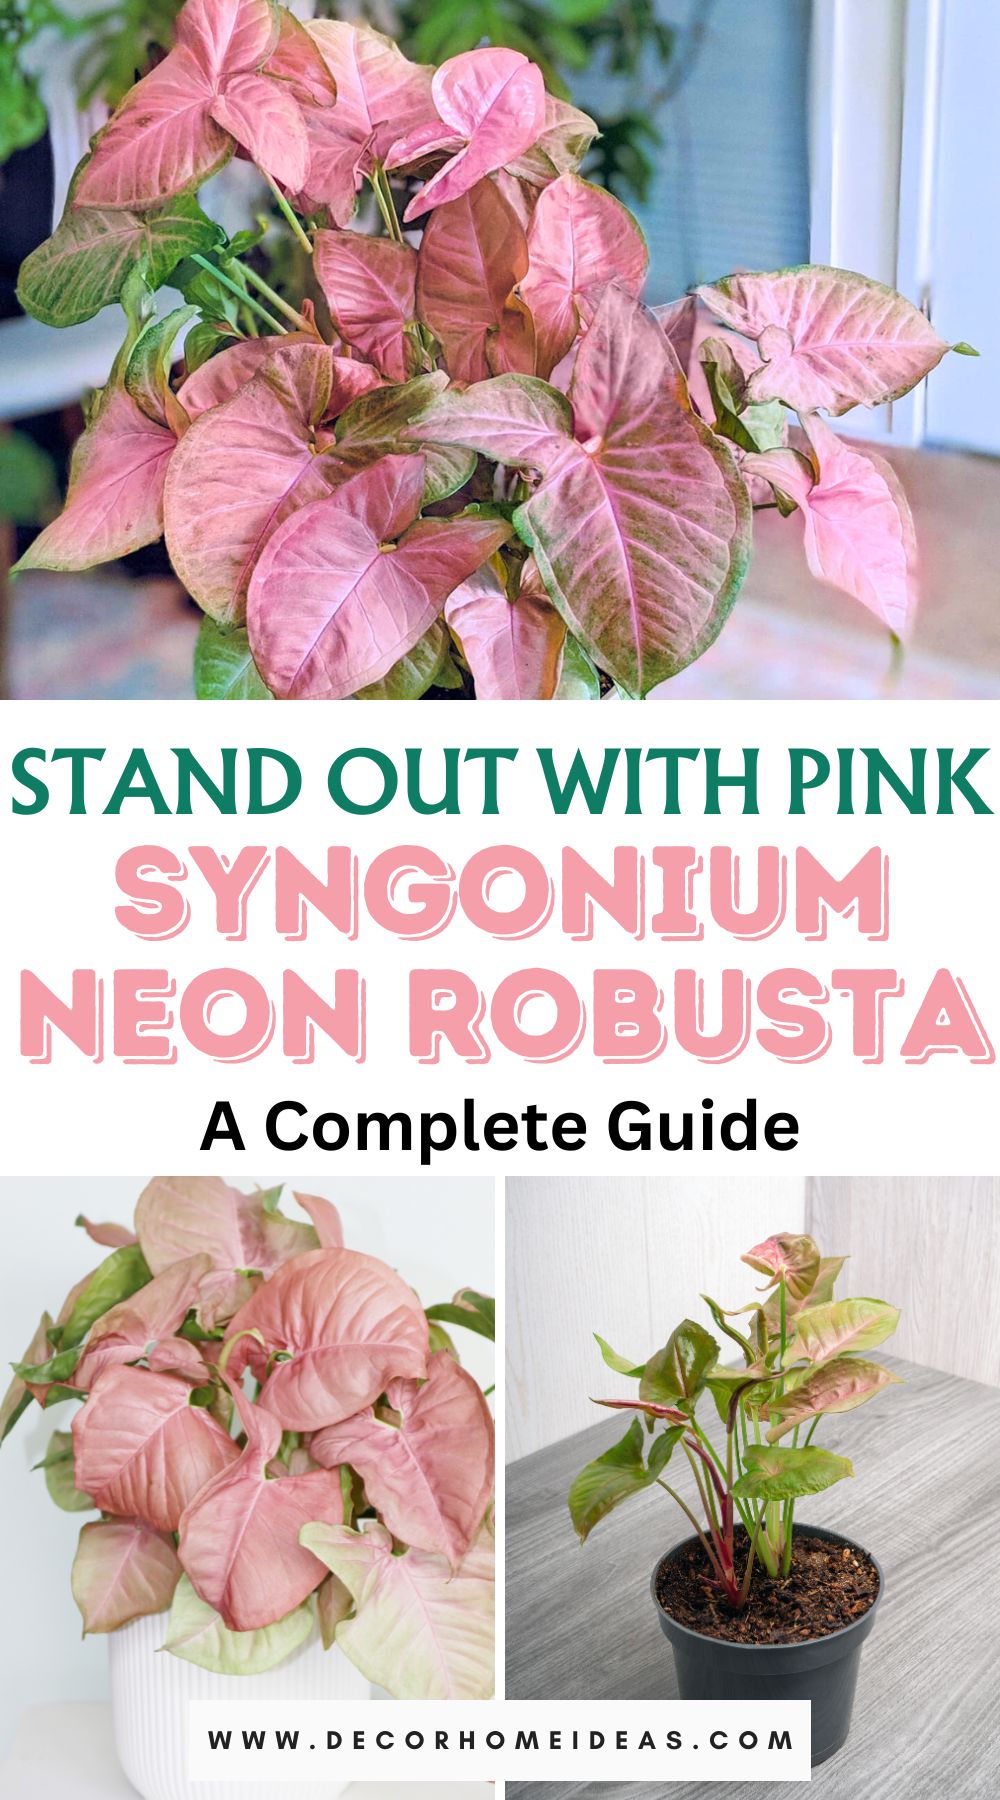 Elevate your indoor jungle with the Syngonium Neon Robusta, the vibrant pink standout. Unearth a complete guide to care, propagation, and styling, and make your space pop with the allure of this unique plant.